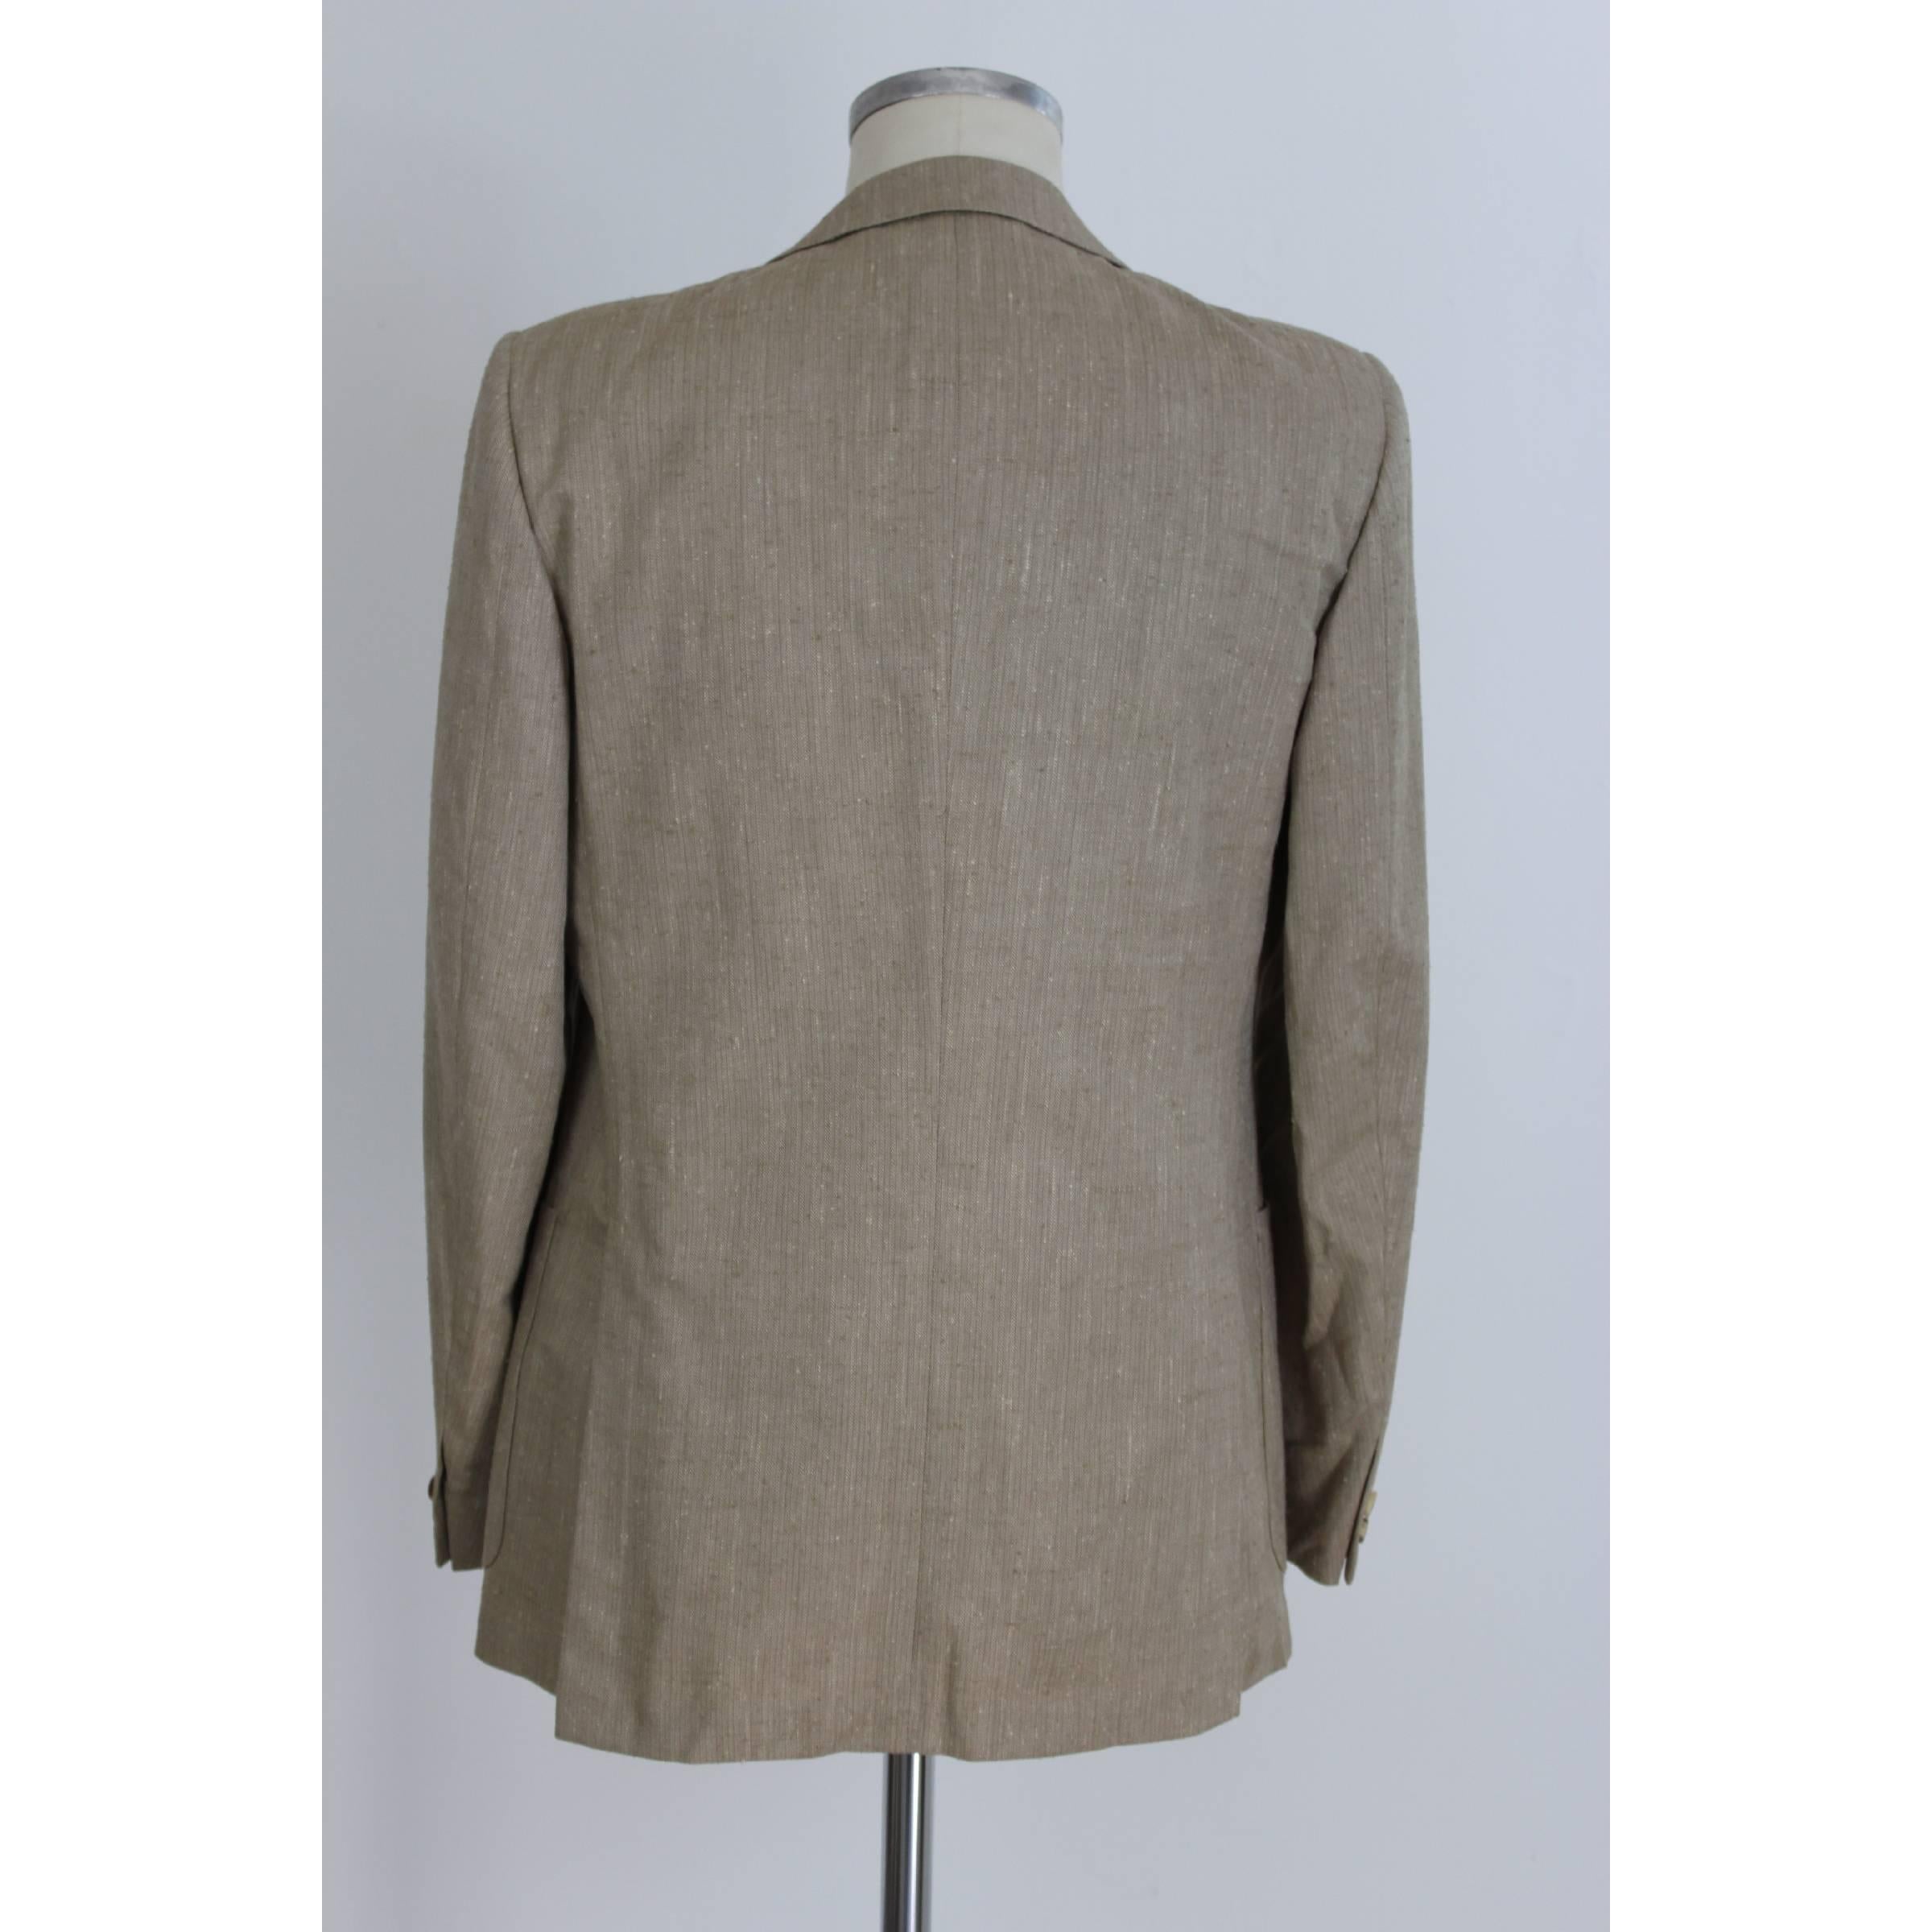 Burberry's men's jacket model beige blazer. Button closure. Completely unlined in wool and silk. Two pockets on the sides and a chest pocket. Made in Italy. New with label.

Size 50 It 40 Us 40 Uk

Shoulders: 50 cm
Chest / bust: 52 cm
Sleeves: 62